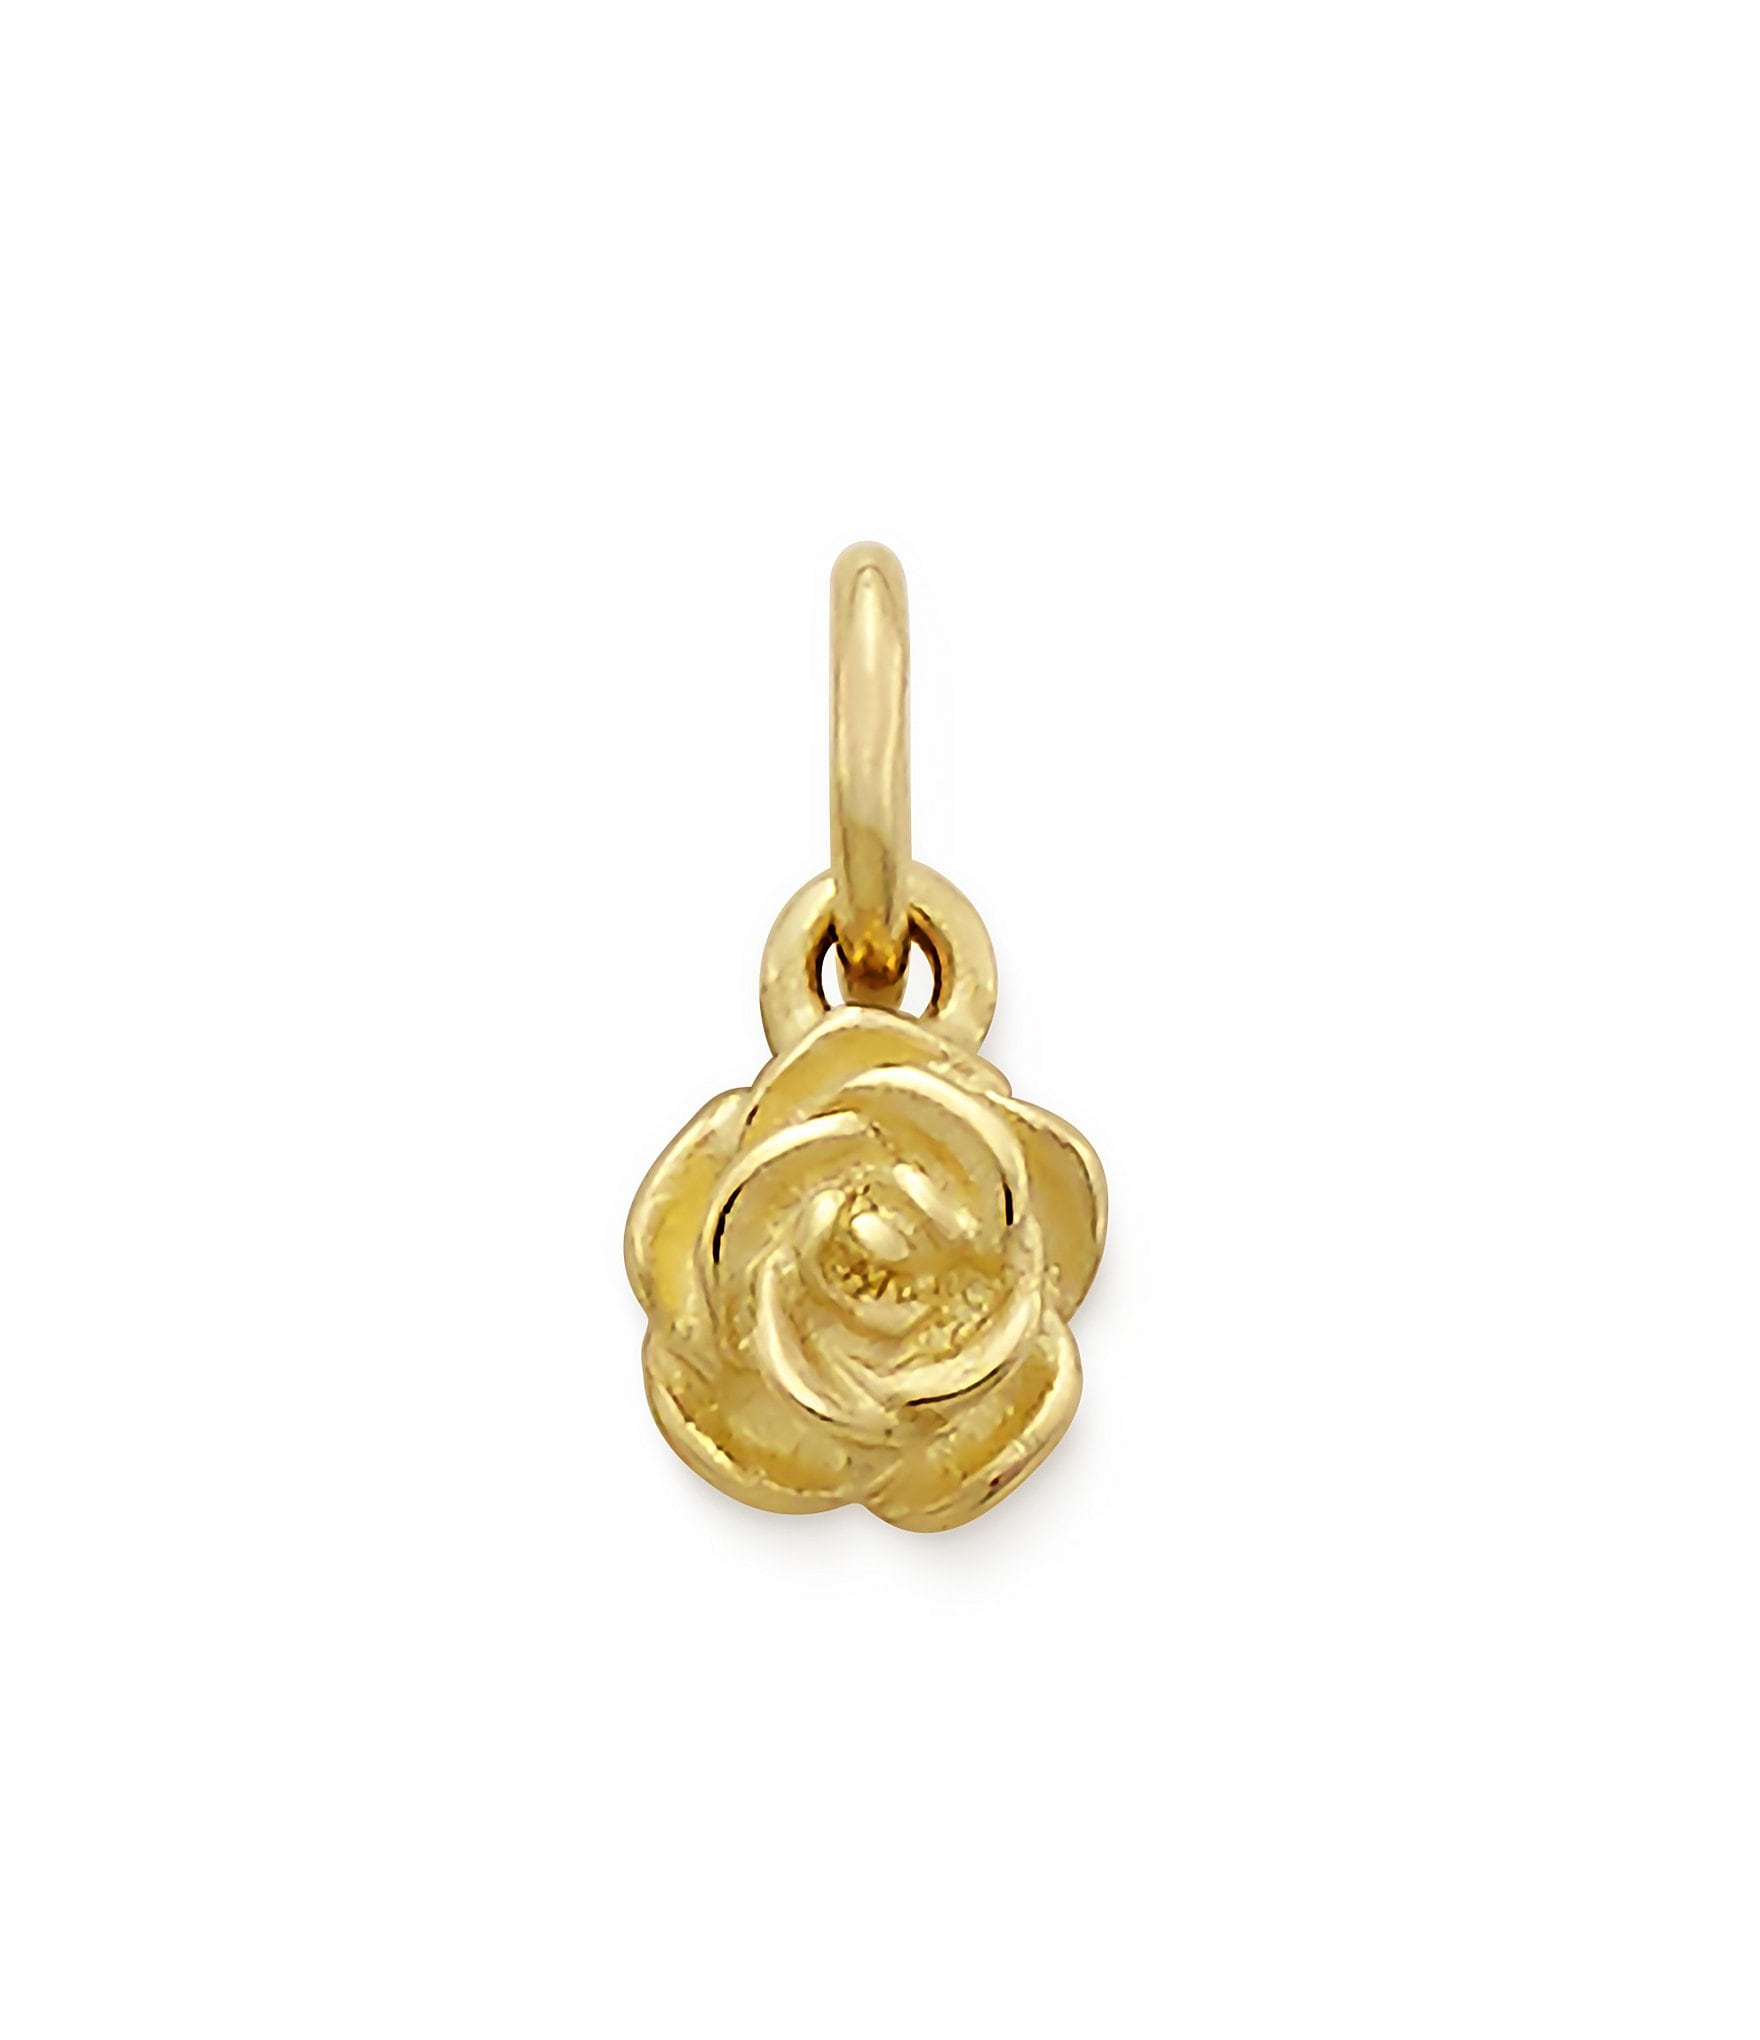 Rose Charms Wholesale Small in Rose Gold Pewter » Flower Charm